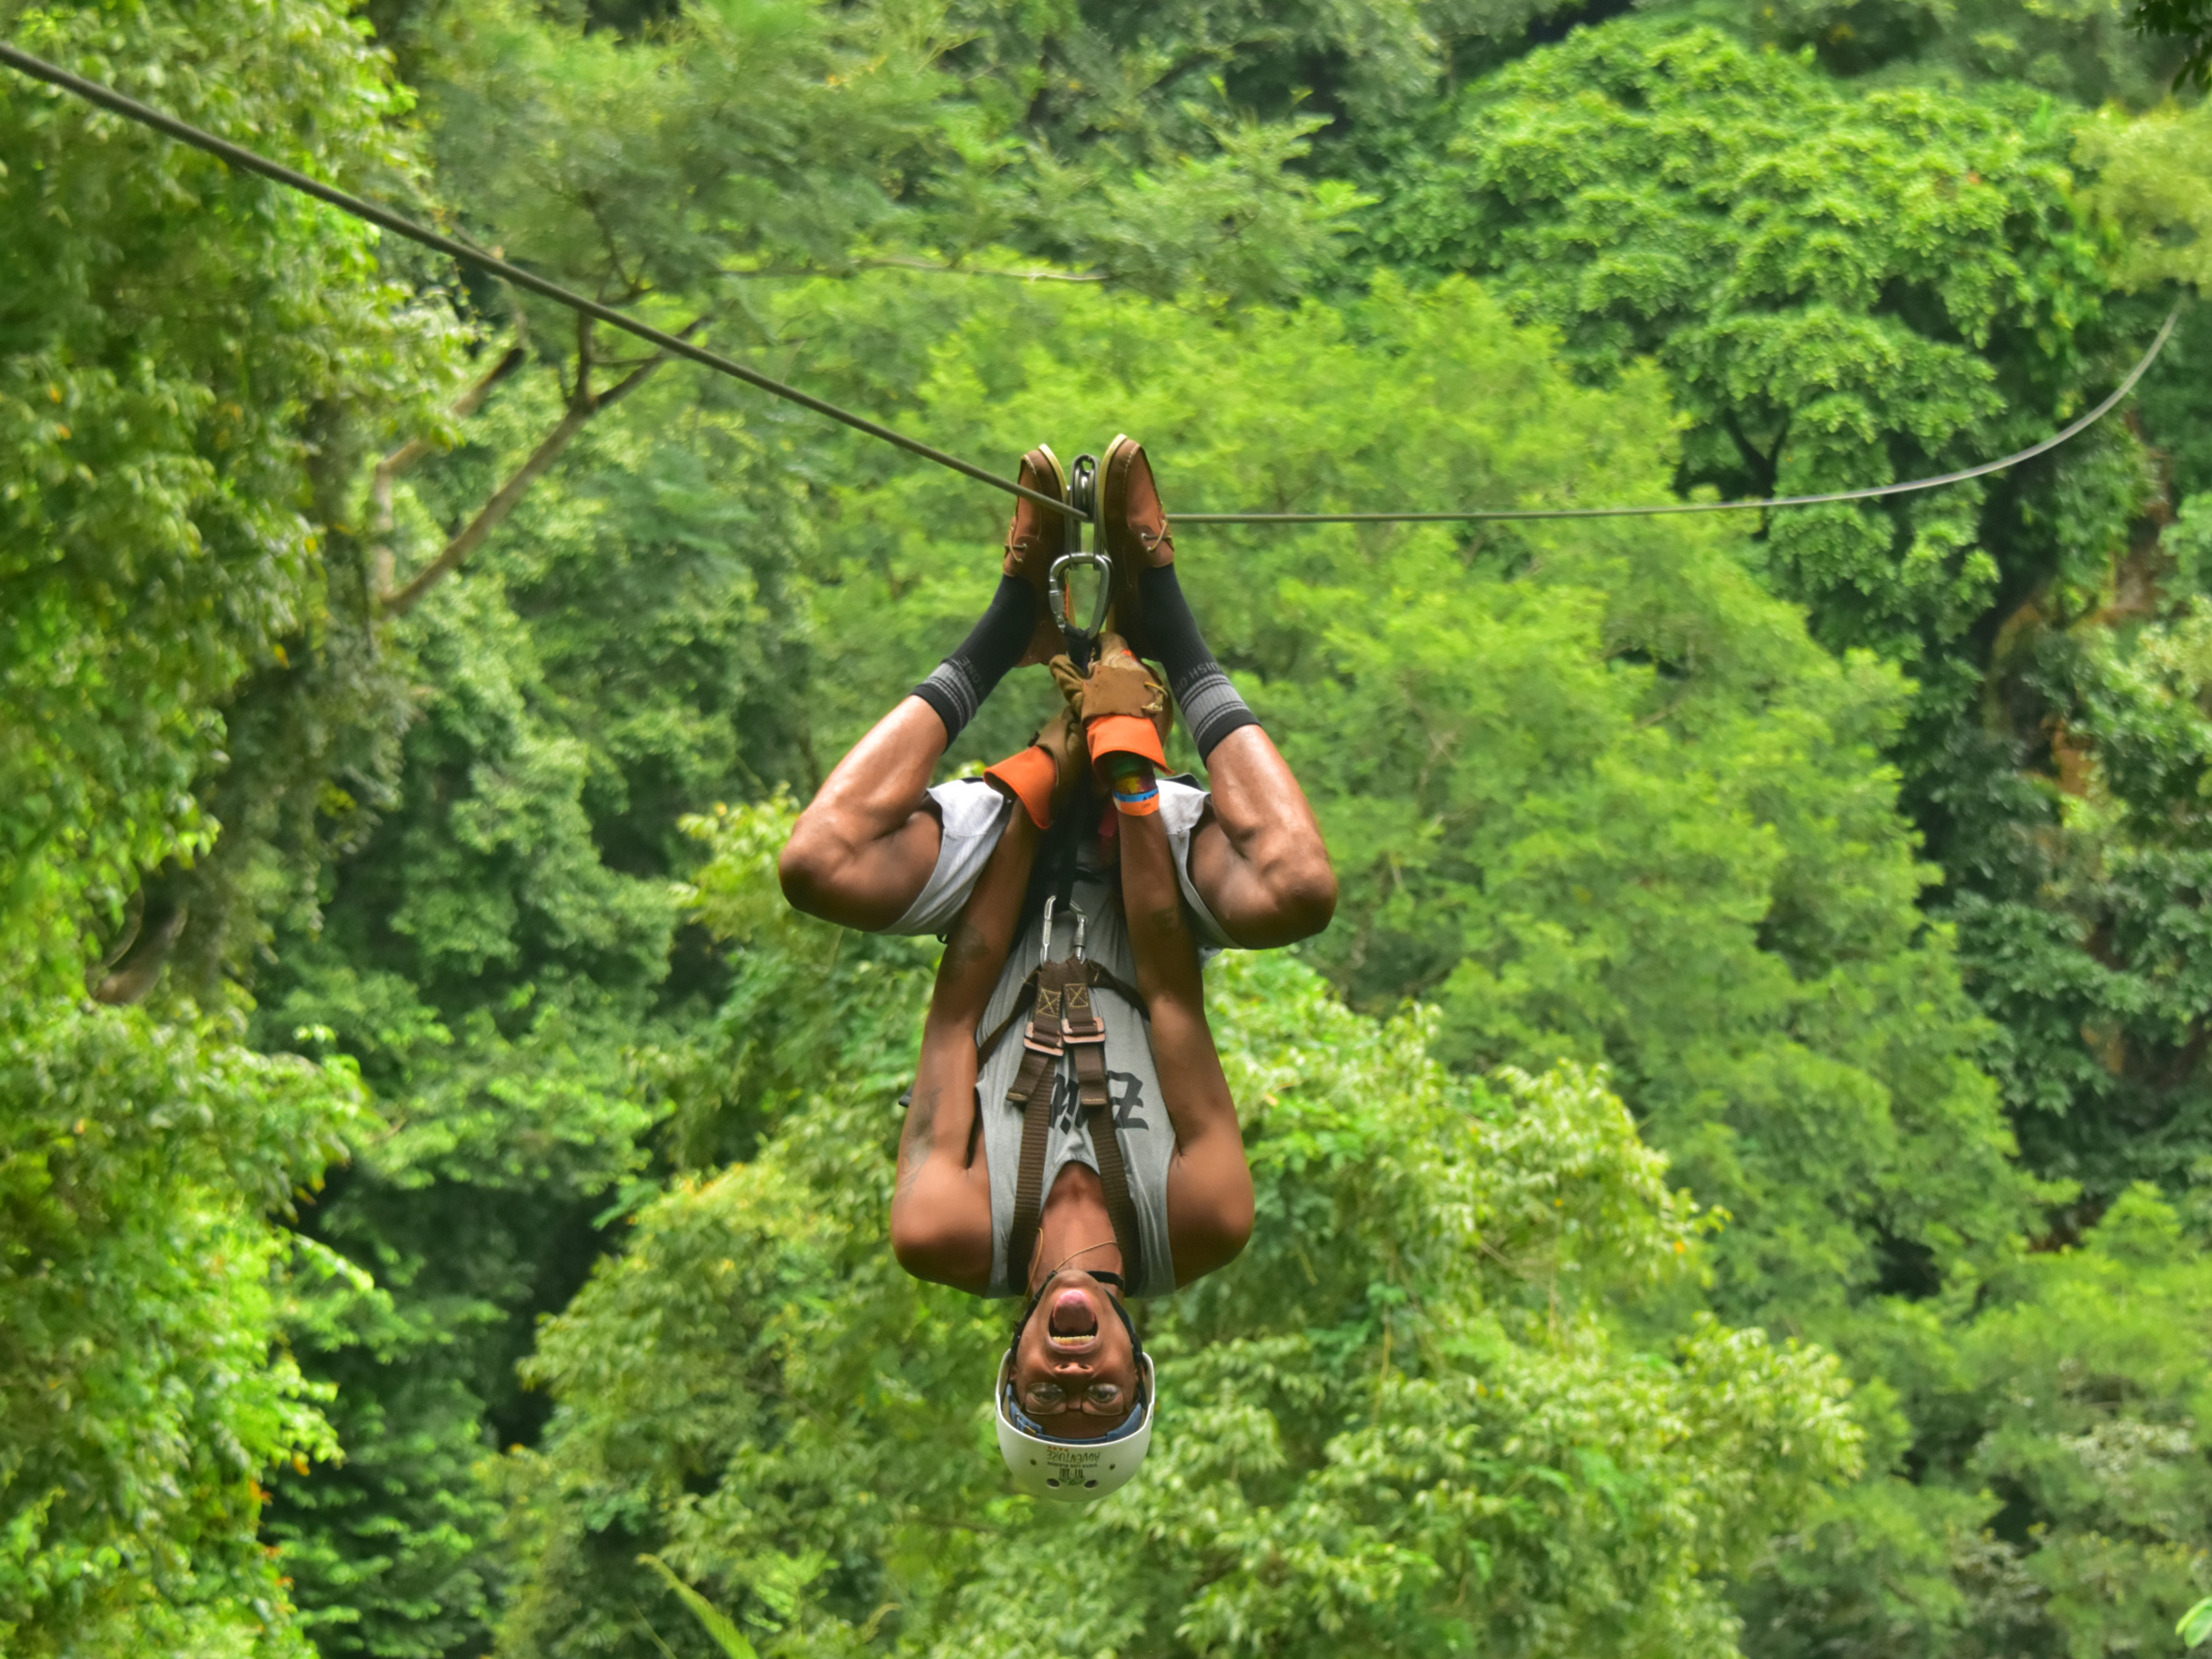 Full Day Canyoning + Zip Lining Adventure